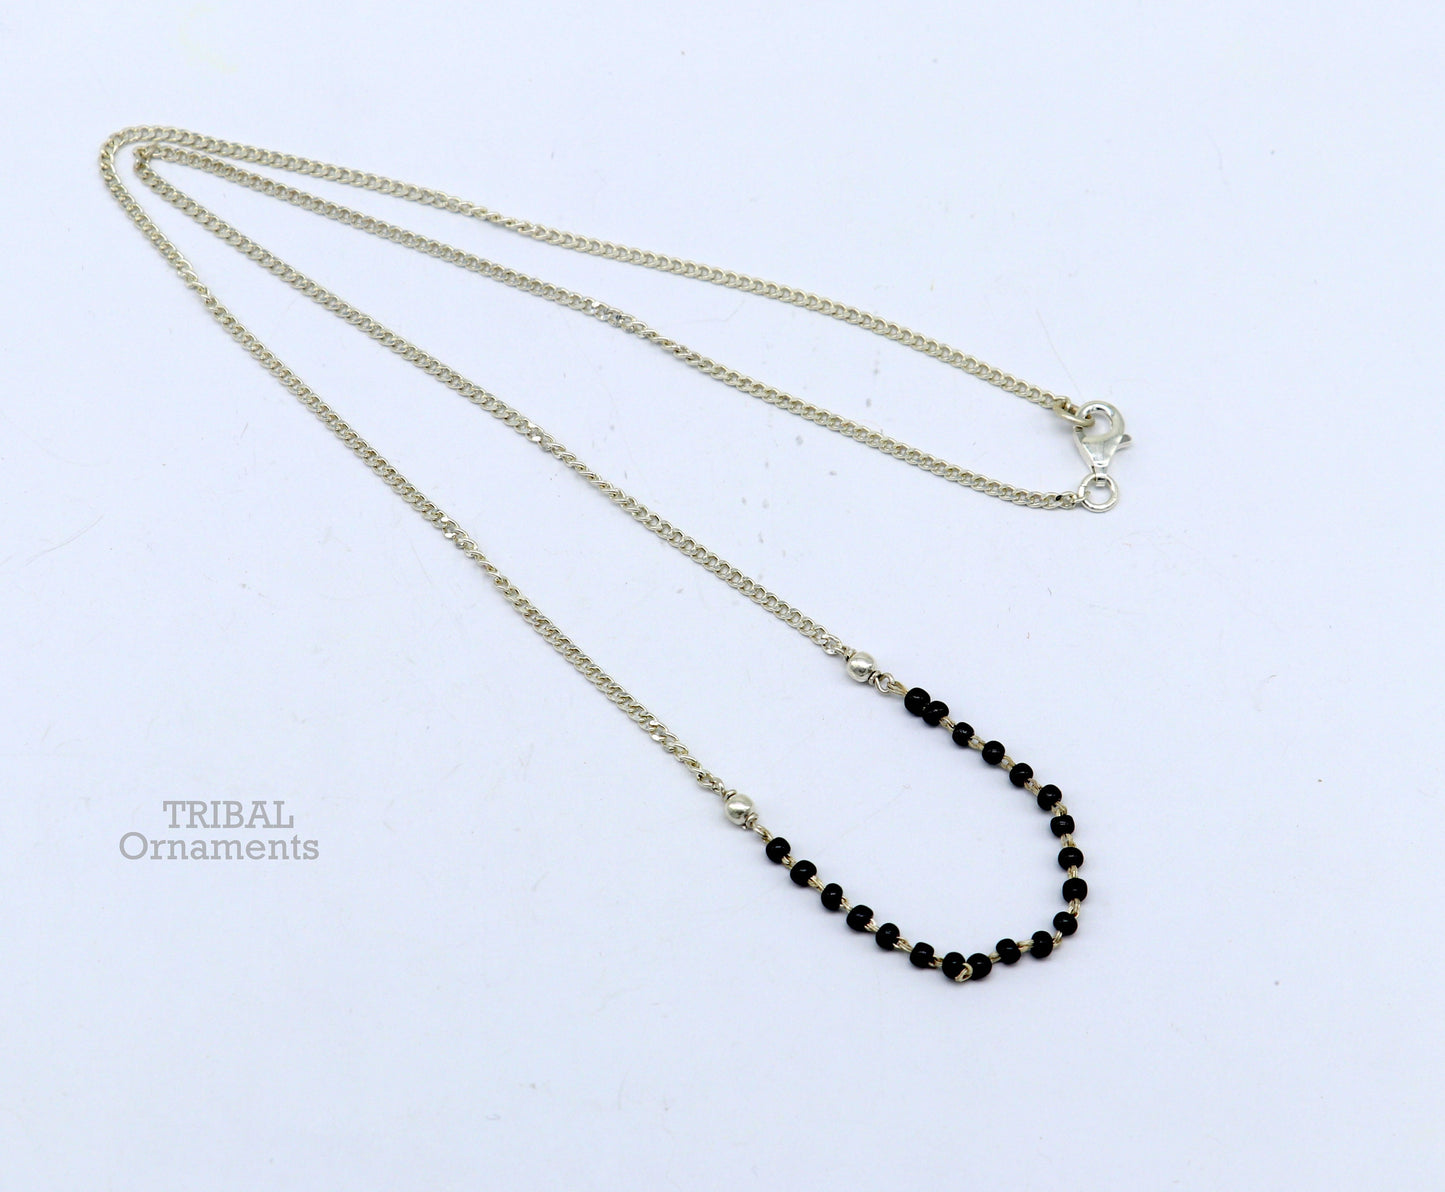 Pure 925 sterling silver black beads with Cuban chain necklace, traditional style brides Mangalsutra style chain necklace set447 - TRIBAL ORNAMENTS